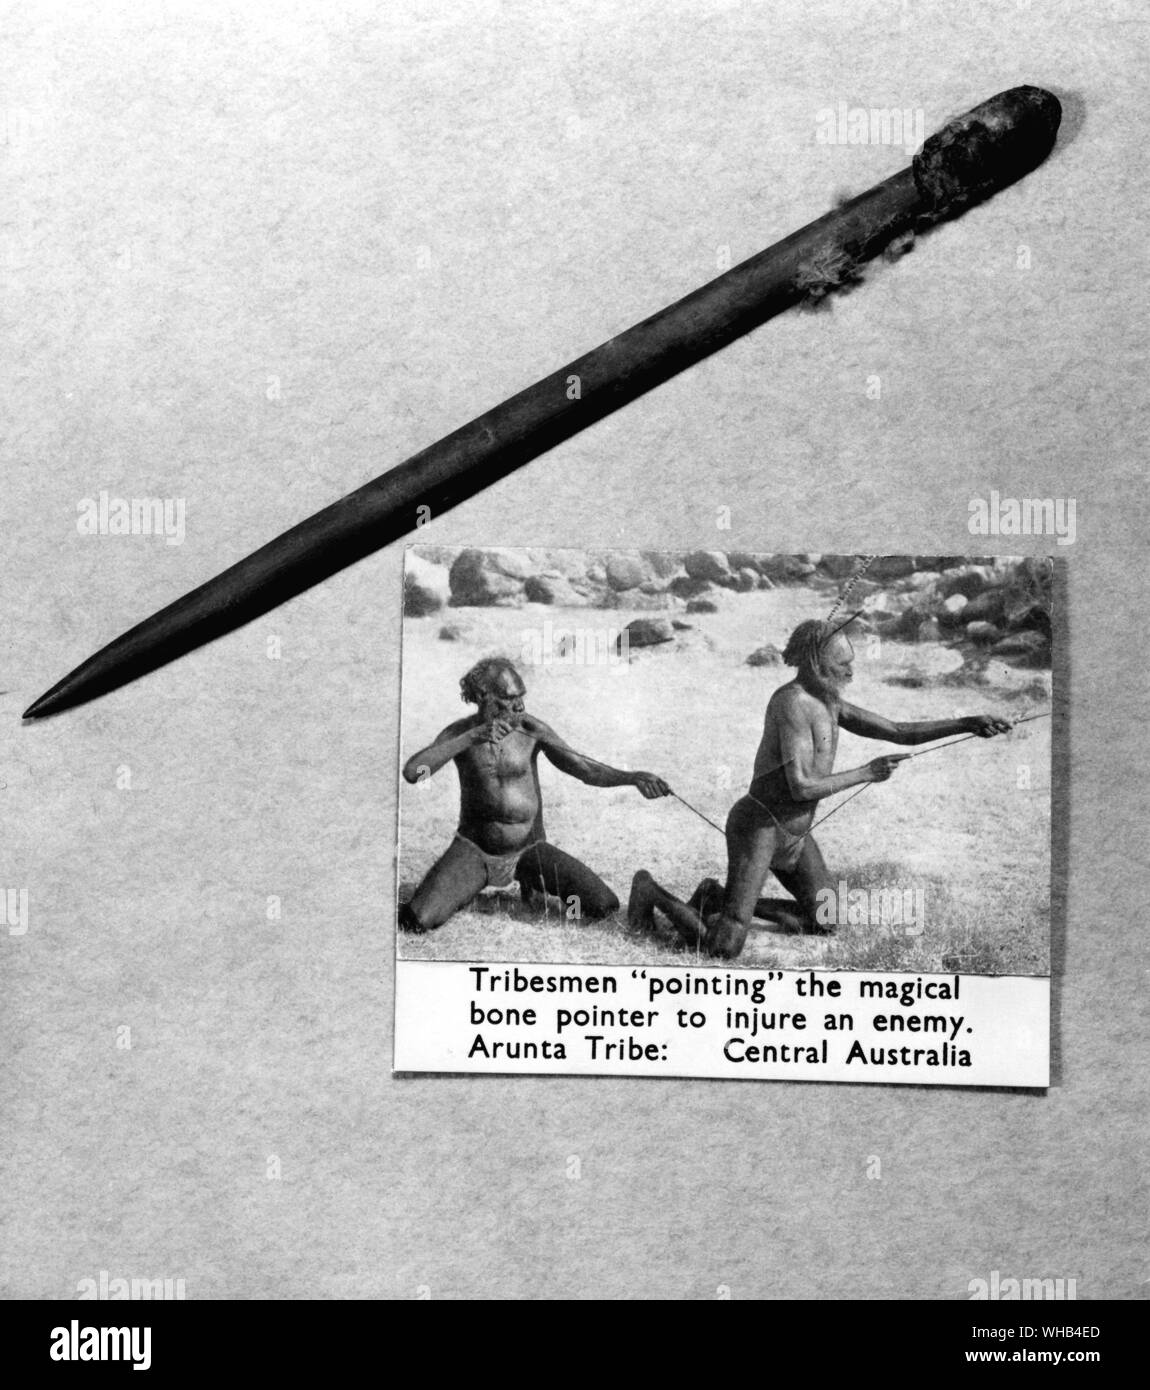 Tribesmen pointing the magical bone pointer to injure an enemy.  Arunta Tribe in Central Australia.. Stock Photo